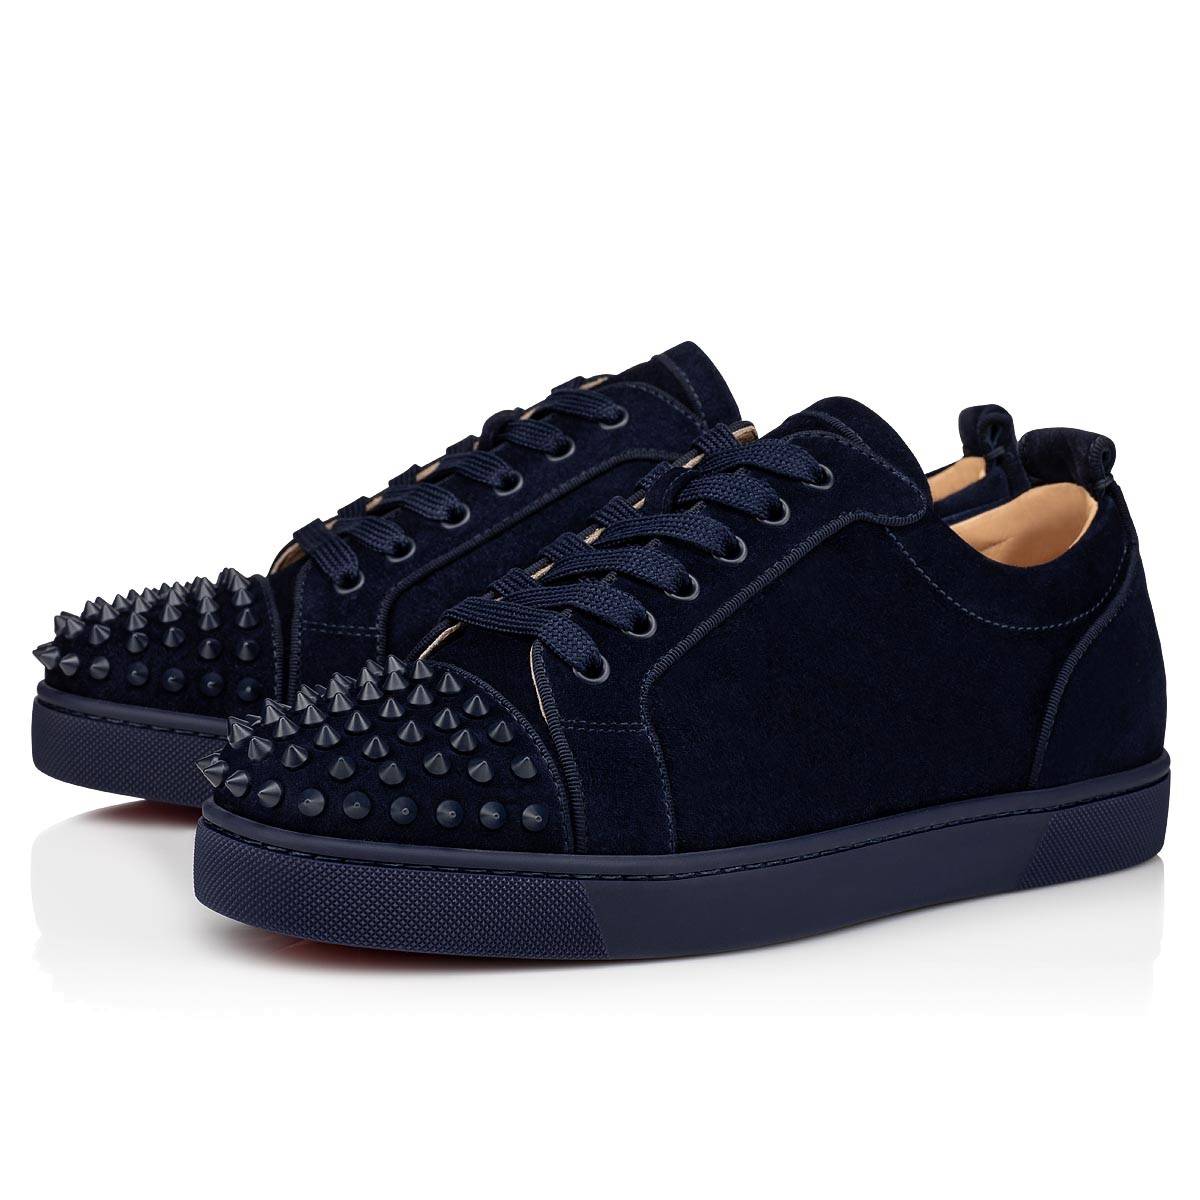 Red Bottoms Low Top Sneakers Cheap - Christian Louboutin Louis Junior ...